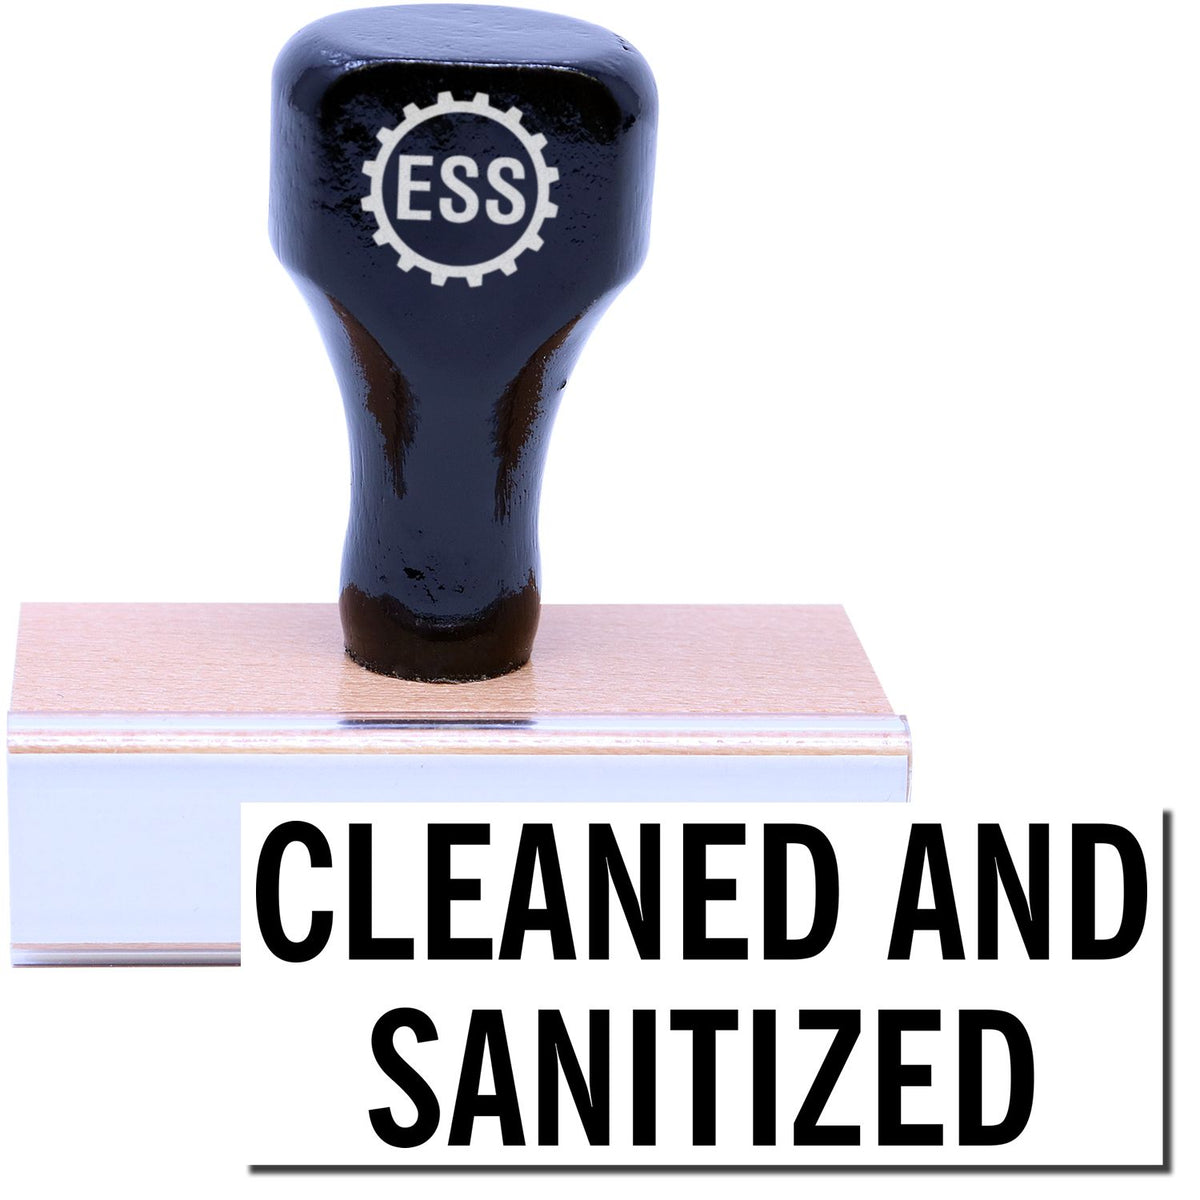 A stock office rubber stamp with a stamped image showing how the text &quot;CLEANED AND SANITIZED&quot; in a large font is displayed after stamping.